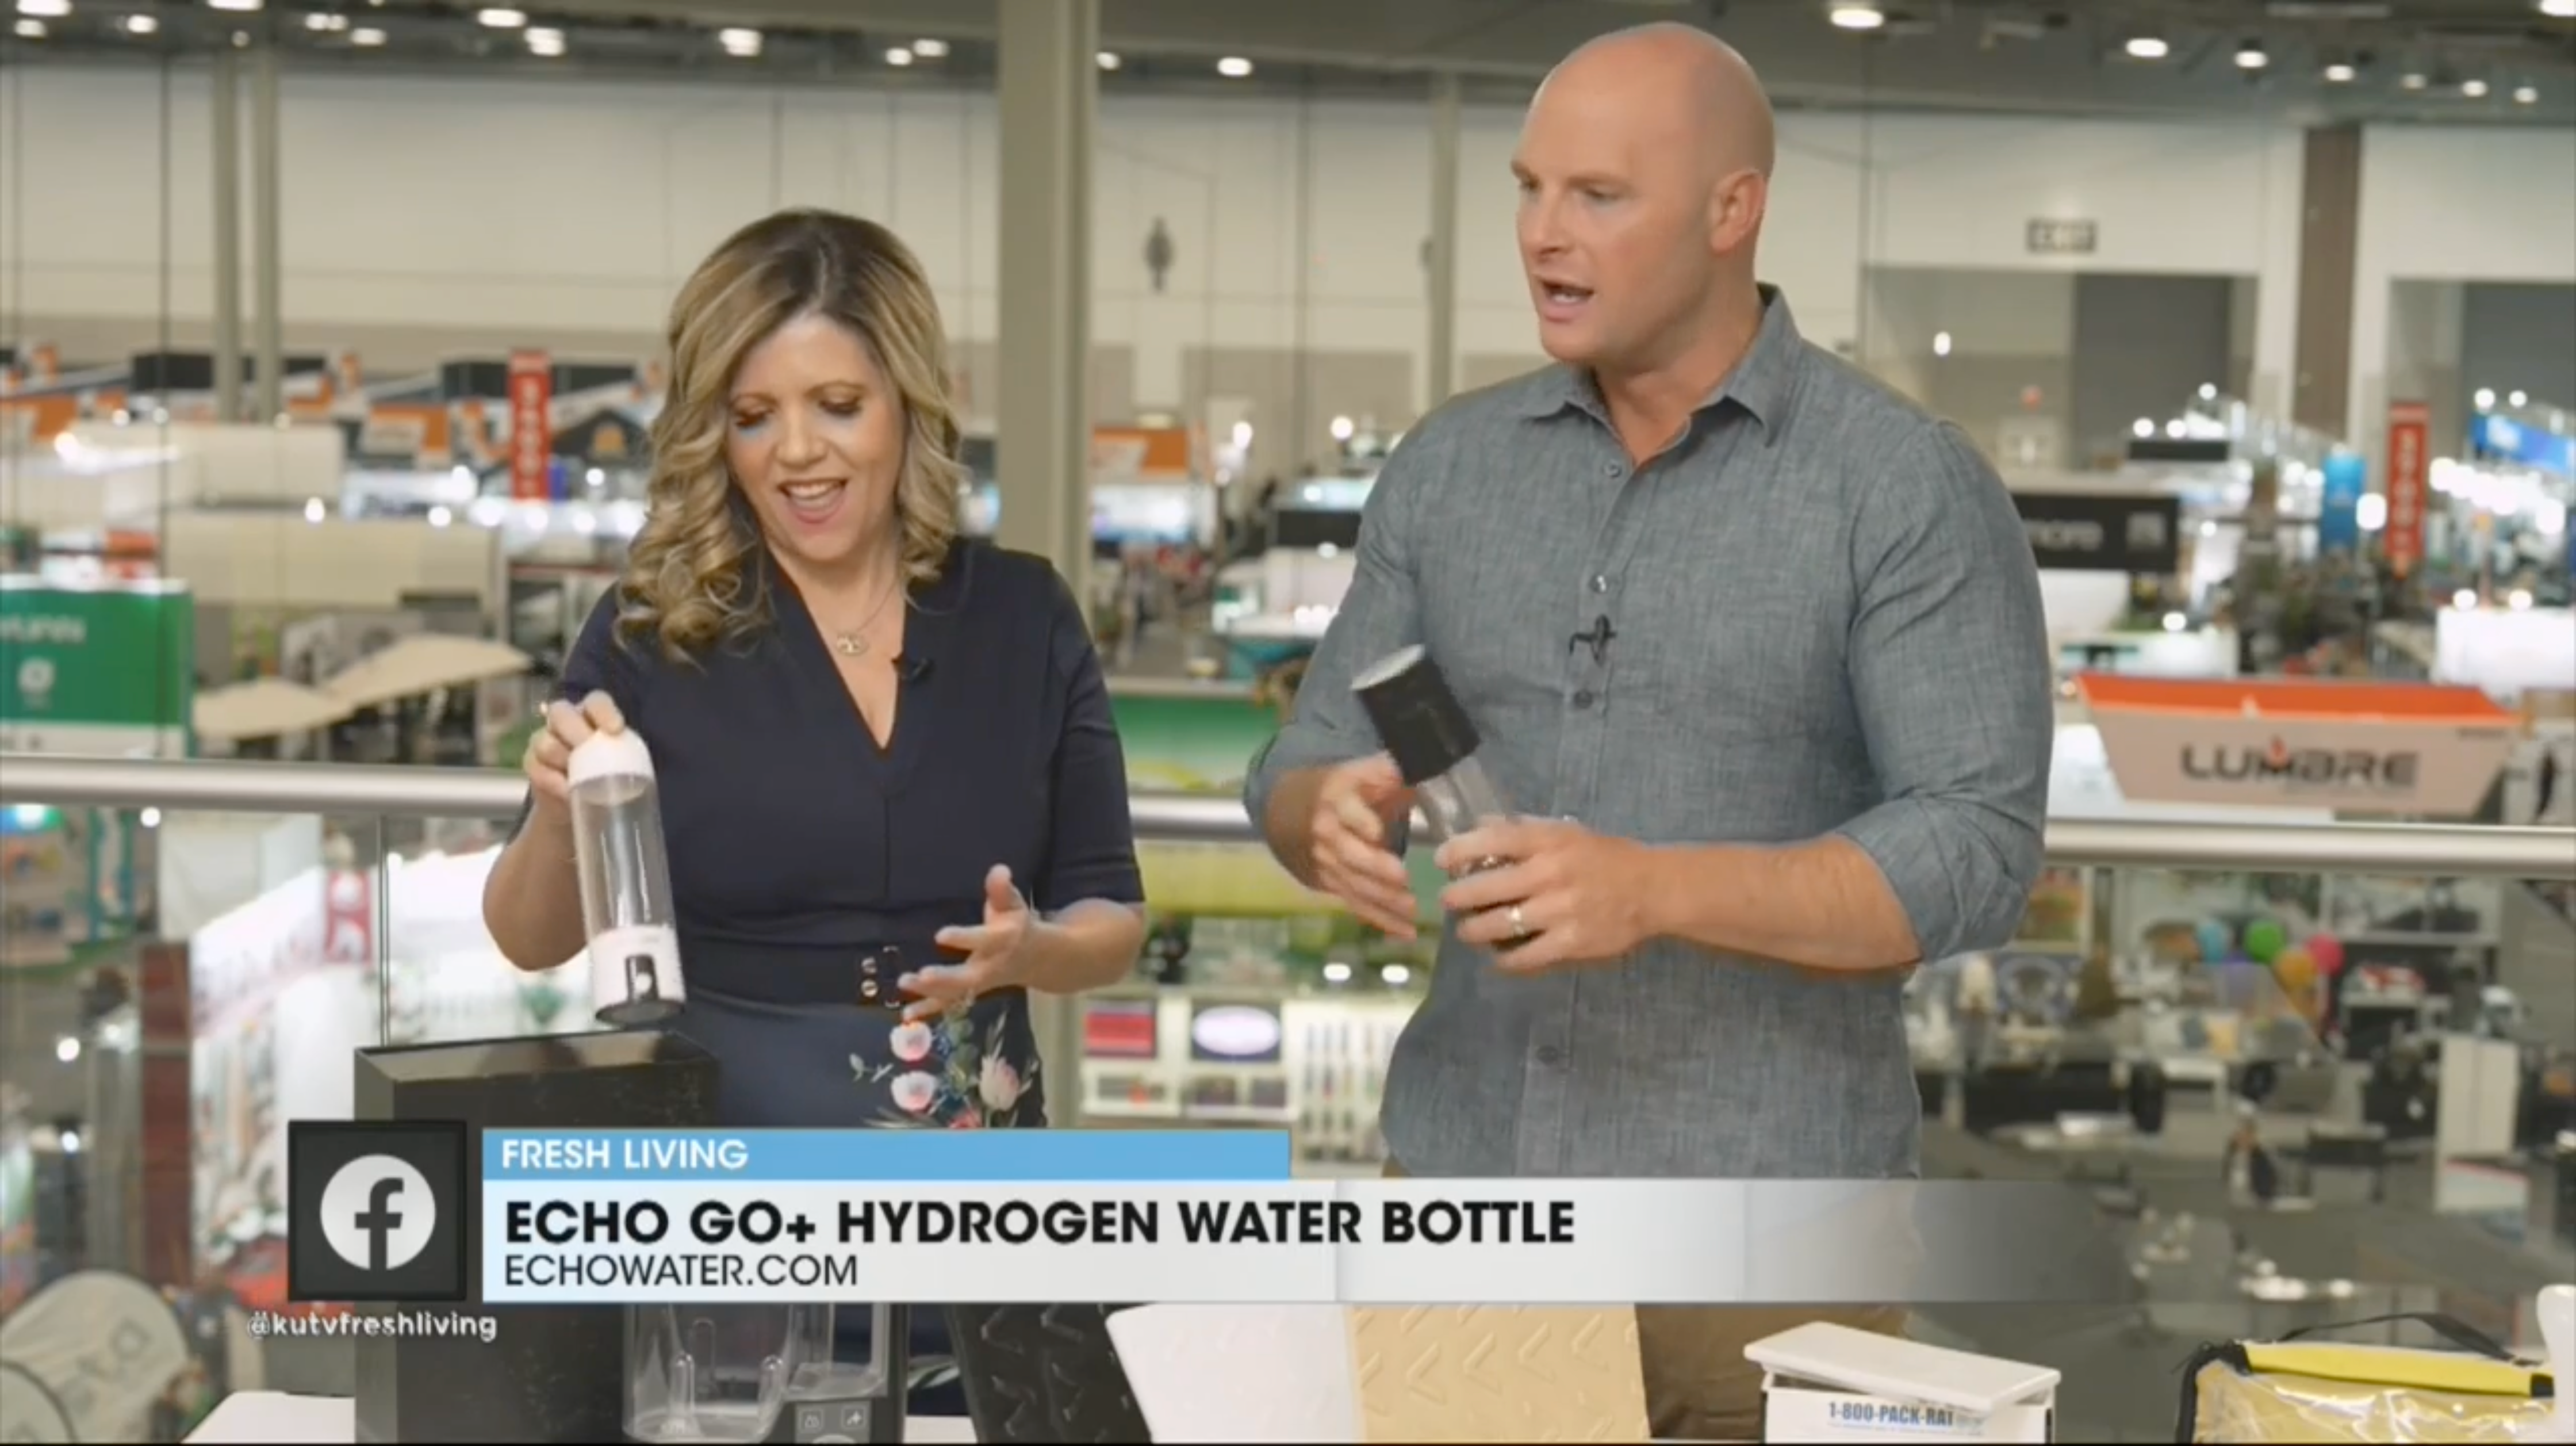 Chip Wade And Kathryn Emery Show Off Echo Go+ At National Hardware Show